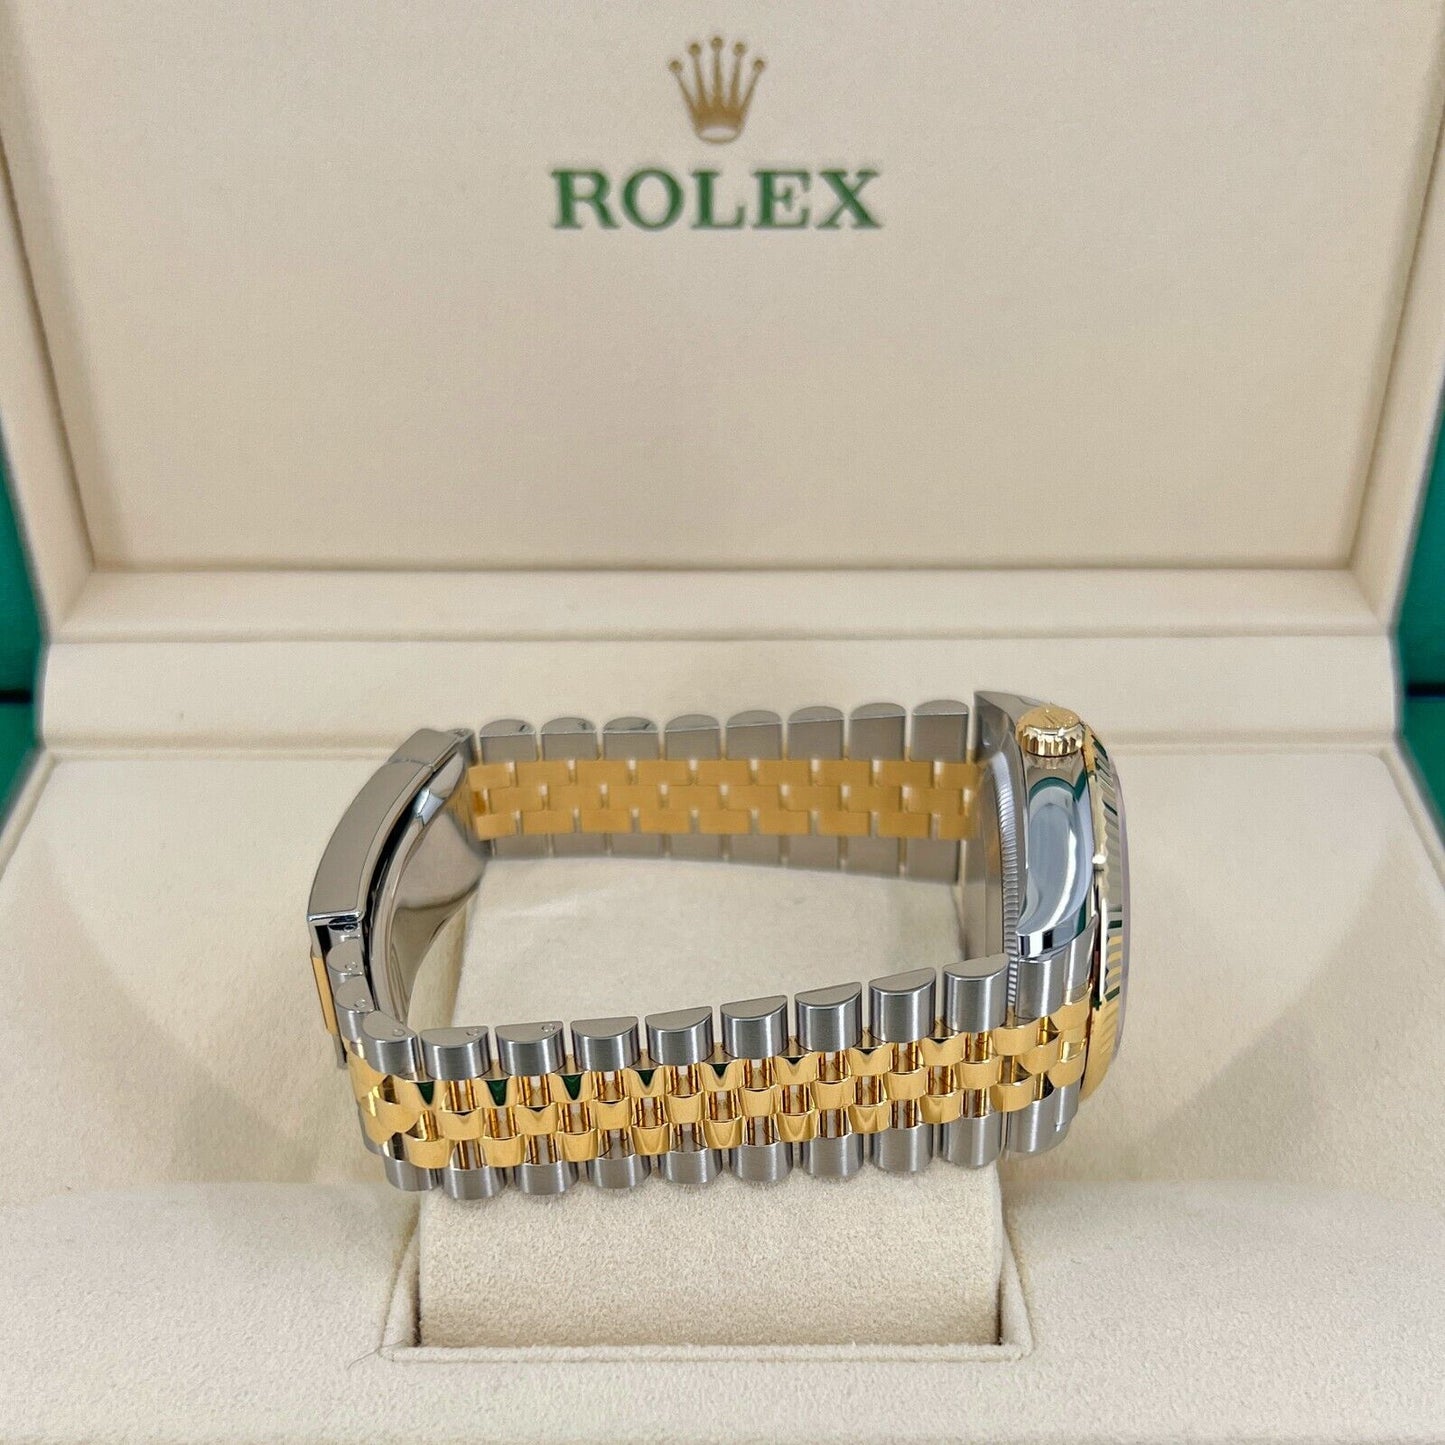 Rolex Datejust 36, 18k Yellow Gold and Stainless Steel, 36mm, Golden, palm motif dial, Ref# 126233-0037, Bracelet 1